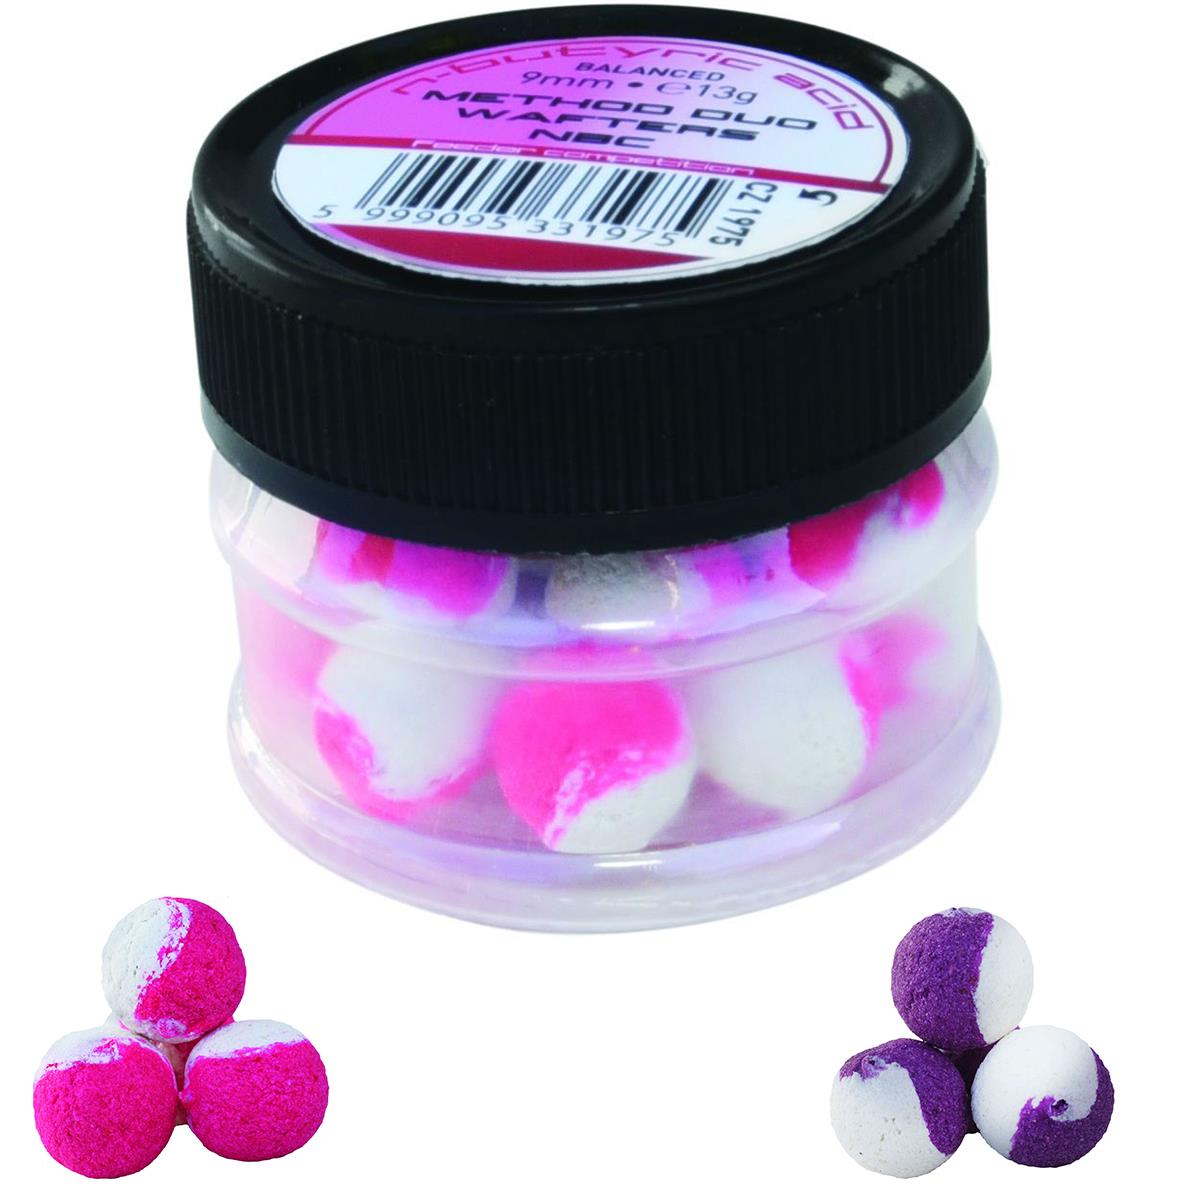 WAFTERS FC METHOD FEEDER NBC DUO 9mm 13gr Purple-White